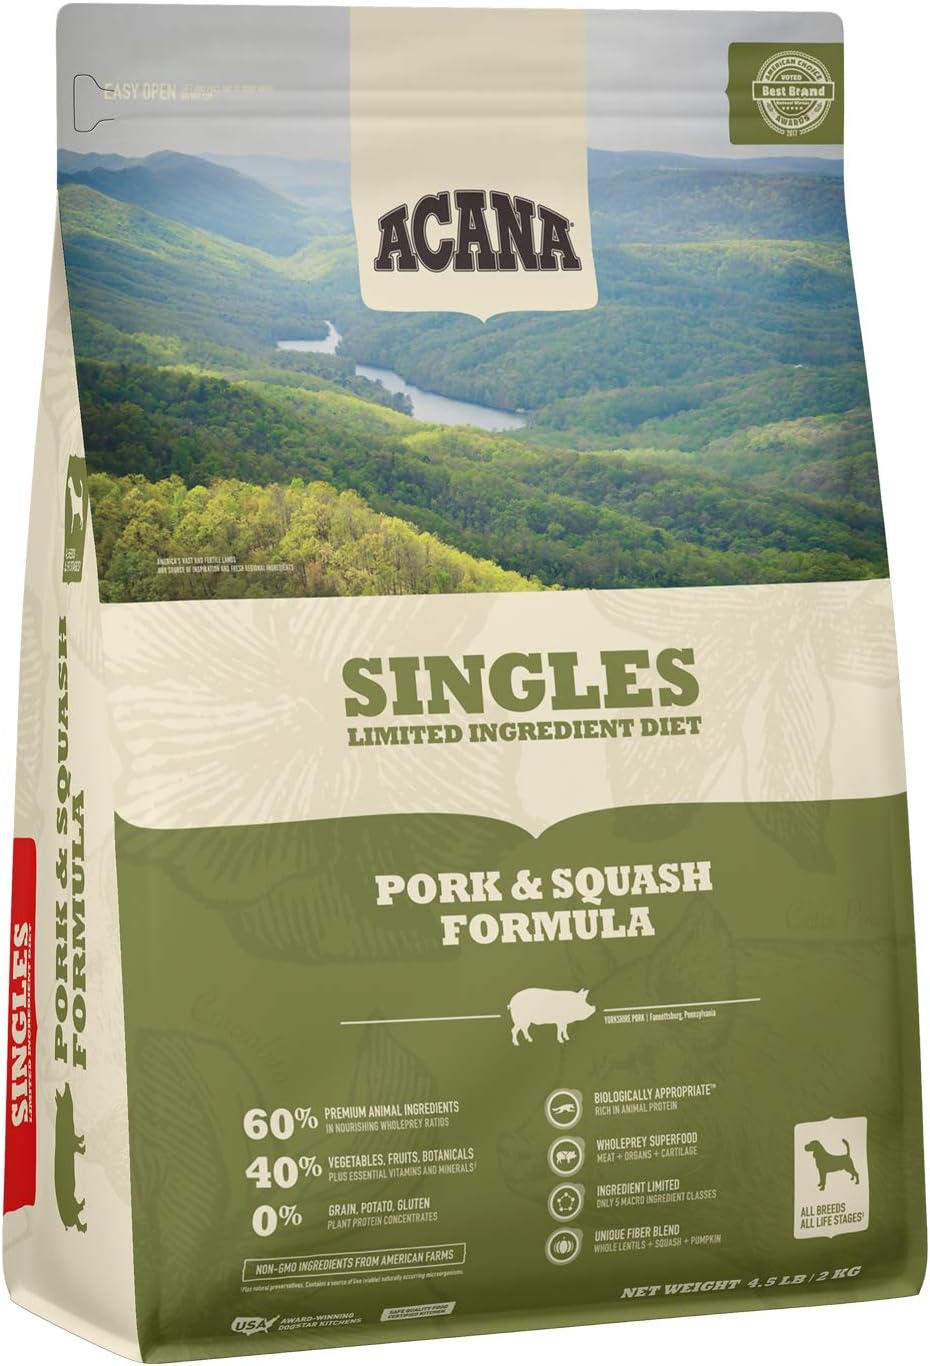 ACANA Singles Diet with Fewer Ingredients